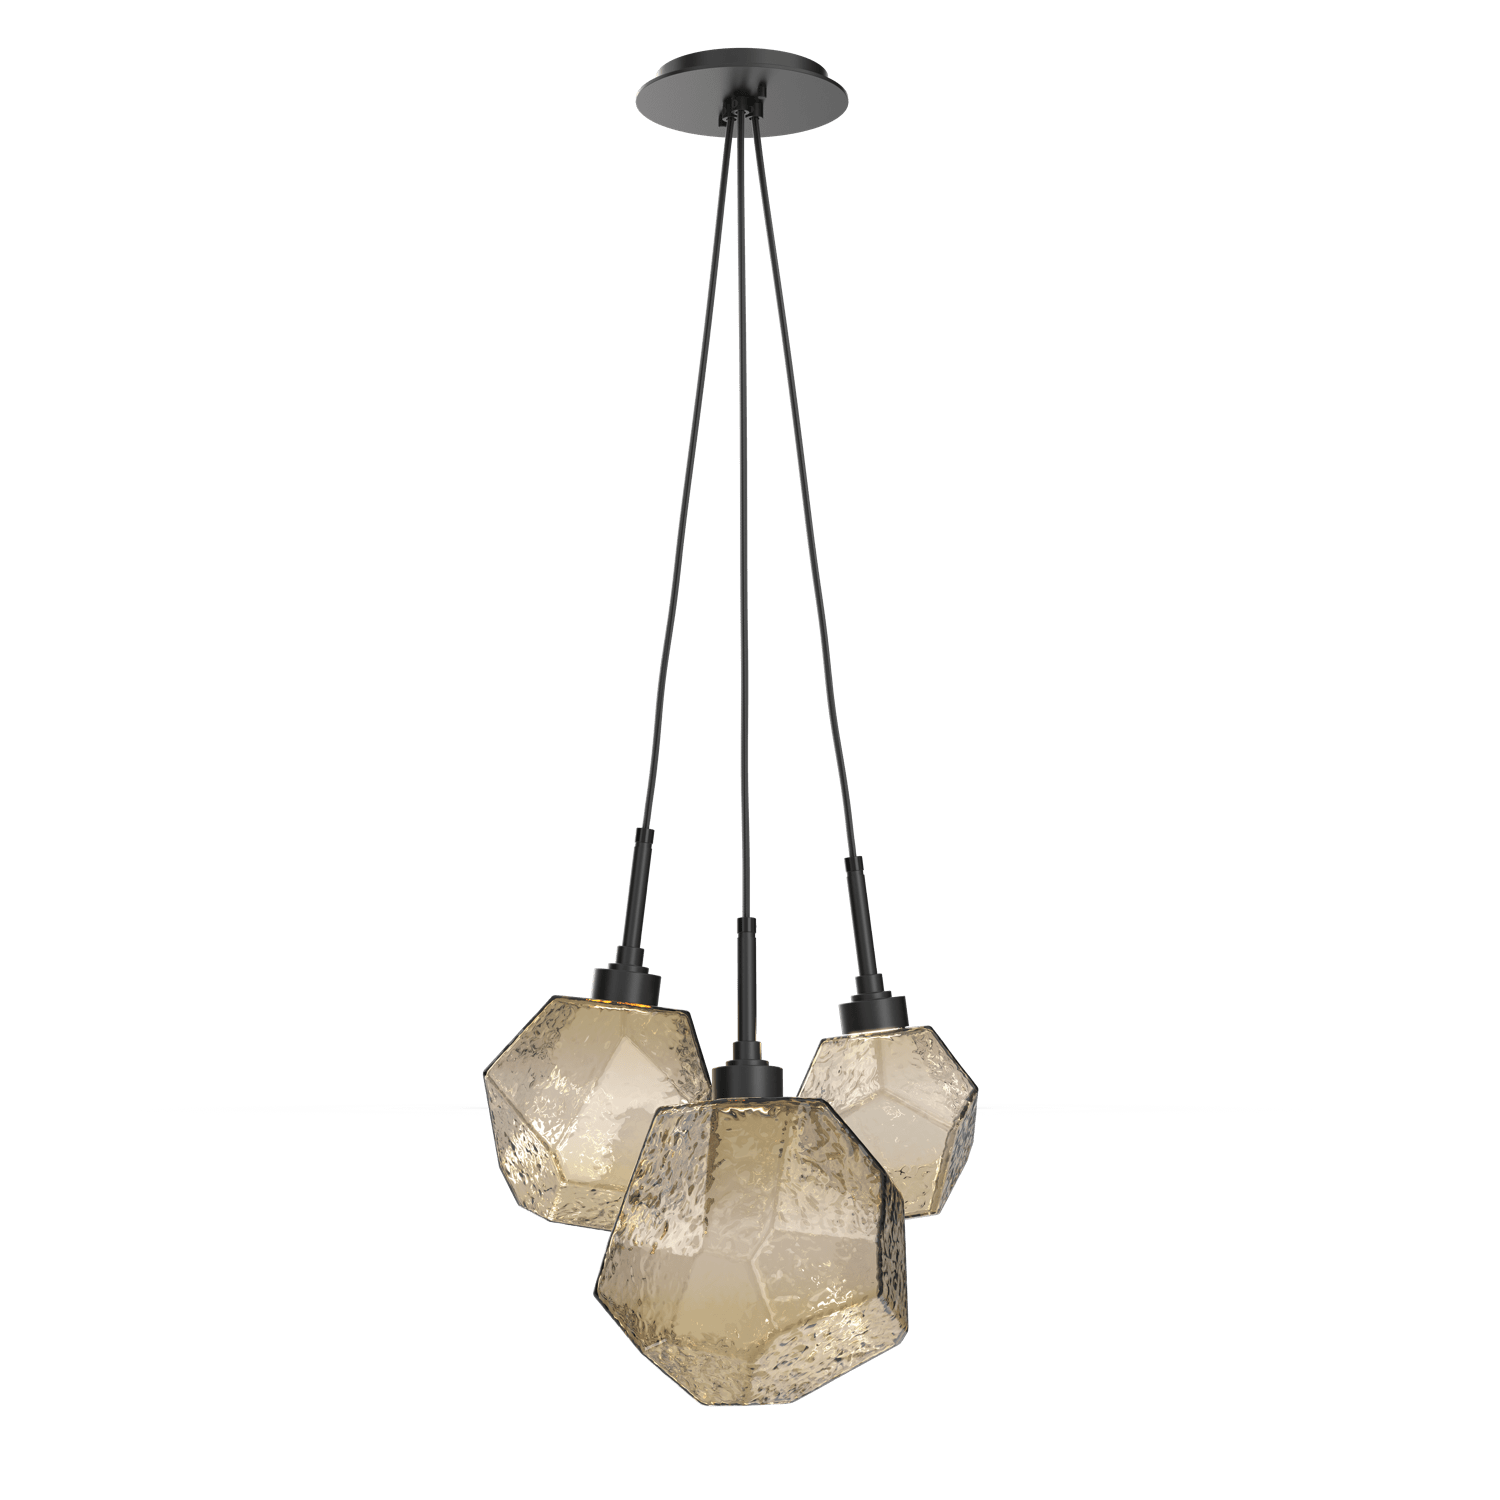 CHB0039-0E-MB-B-Hammerton-Studio-Gem-3-light-cluster-pendant-light-with-matte-black-finish-and-bronze-blown-glass-shades-and-LED-lamping